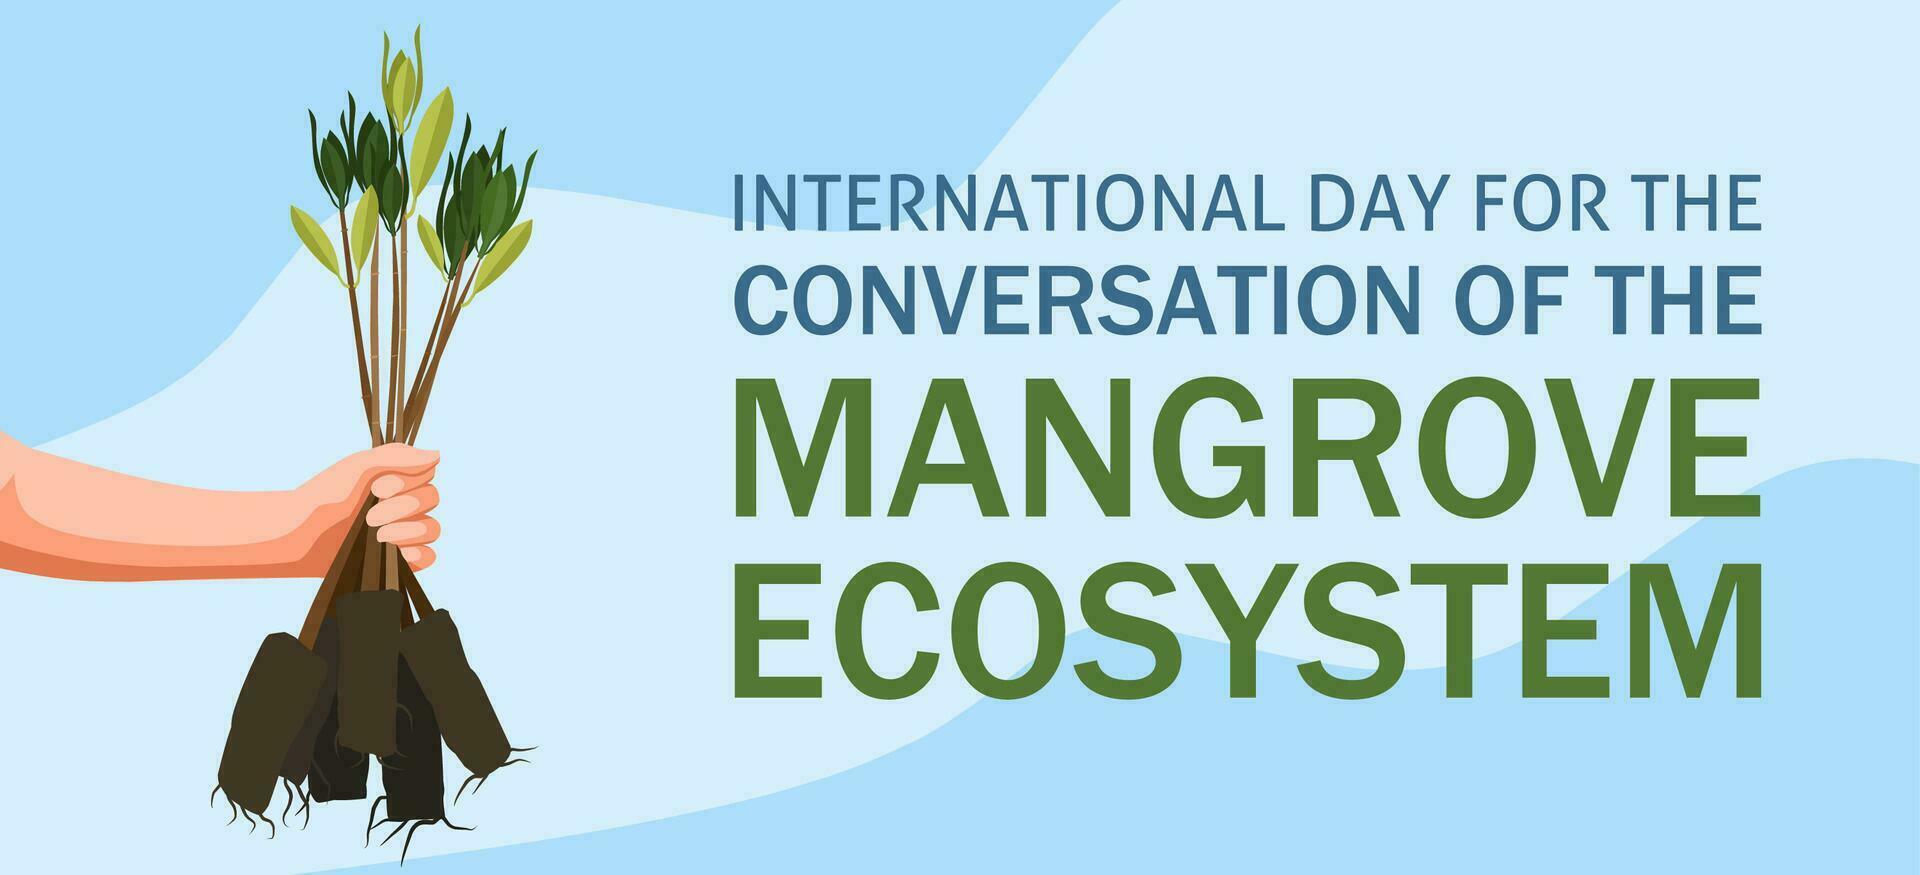 Conversation of the mangrove ecosystem day. Vector illustration. Suitable for Poster, Banners, campaign and greeting card.